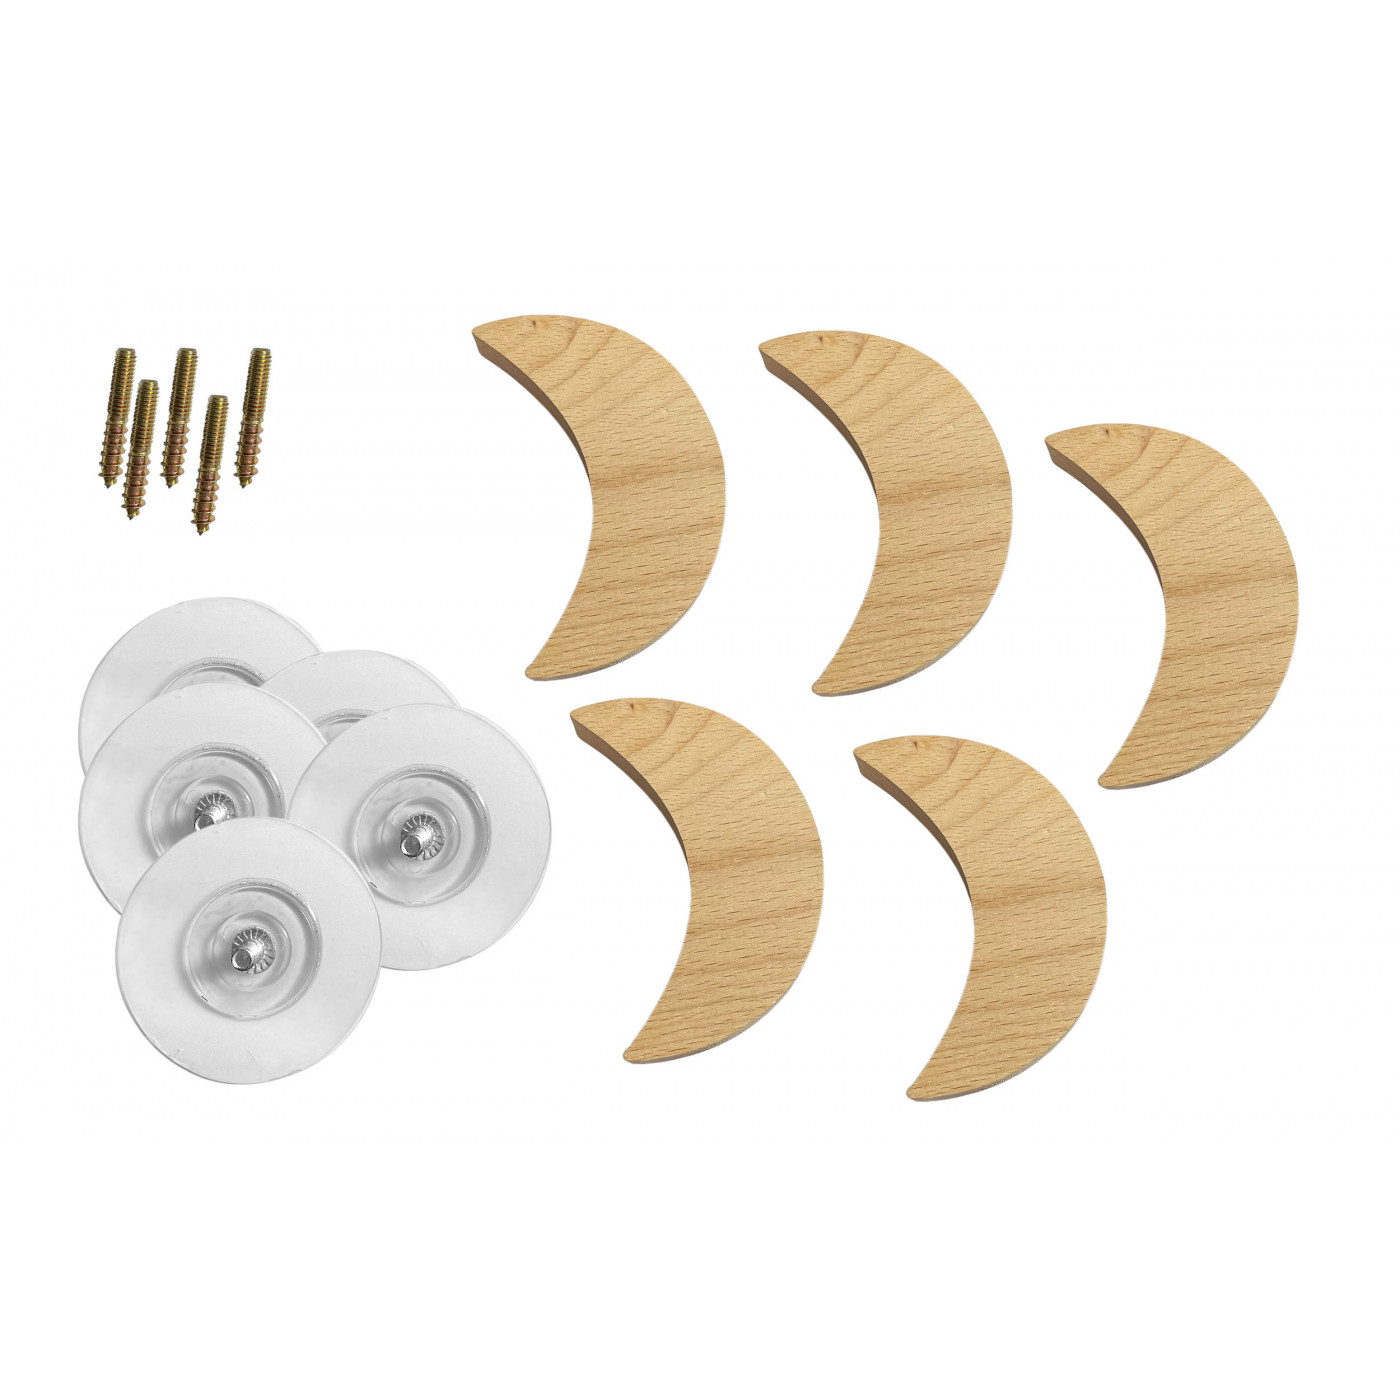 Set of 5 wooden clothes hooks (moon) for childrens rooms and